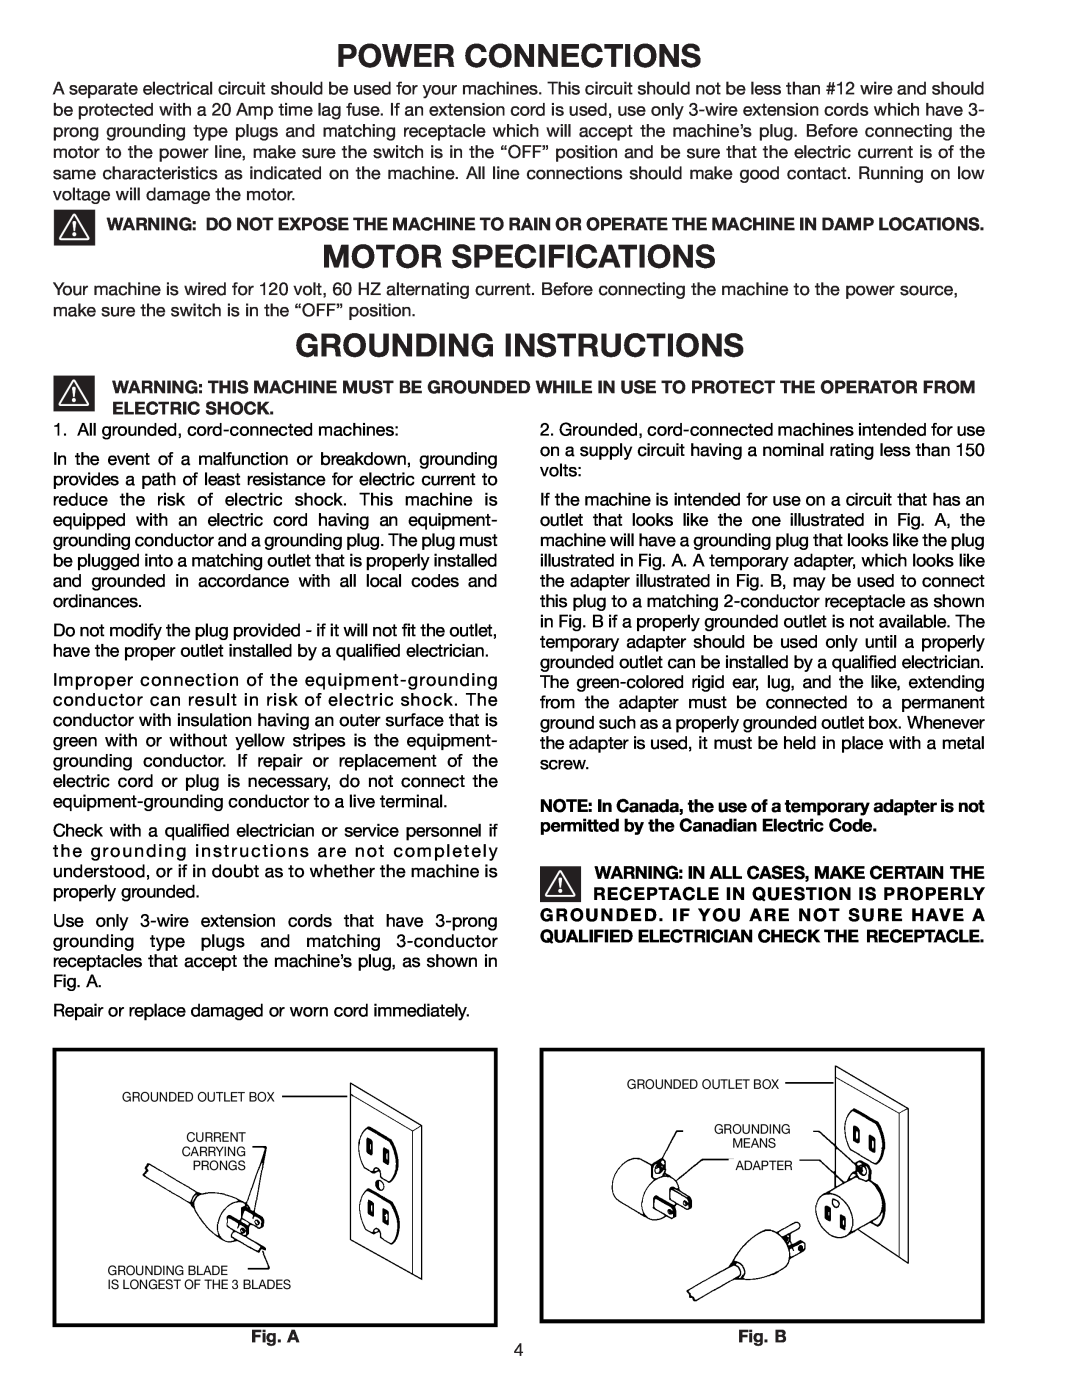 Delta AP200 instruction manual Power Connections, Motor Specifications, Grounding Instructions 